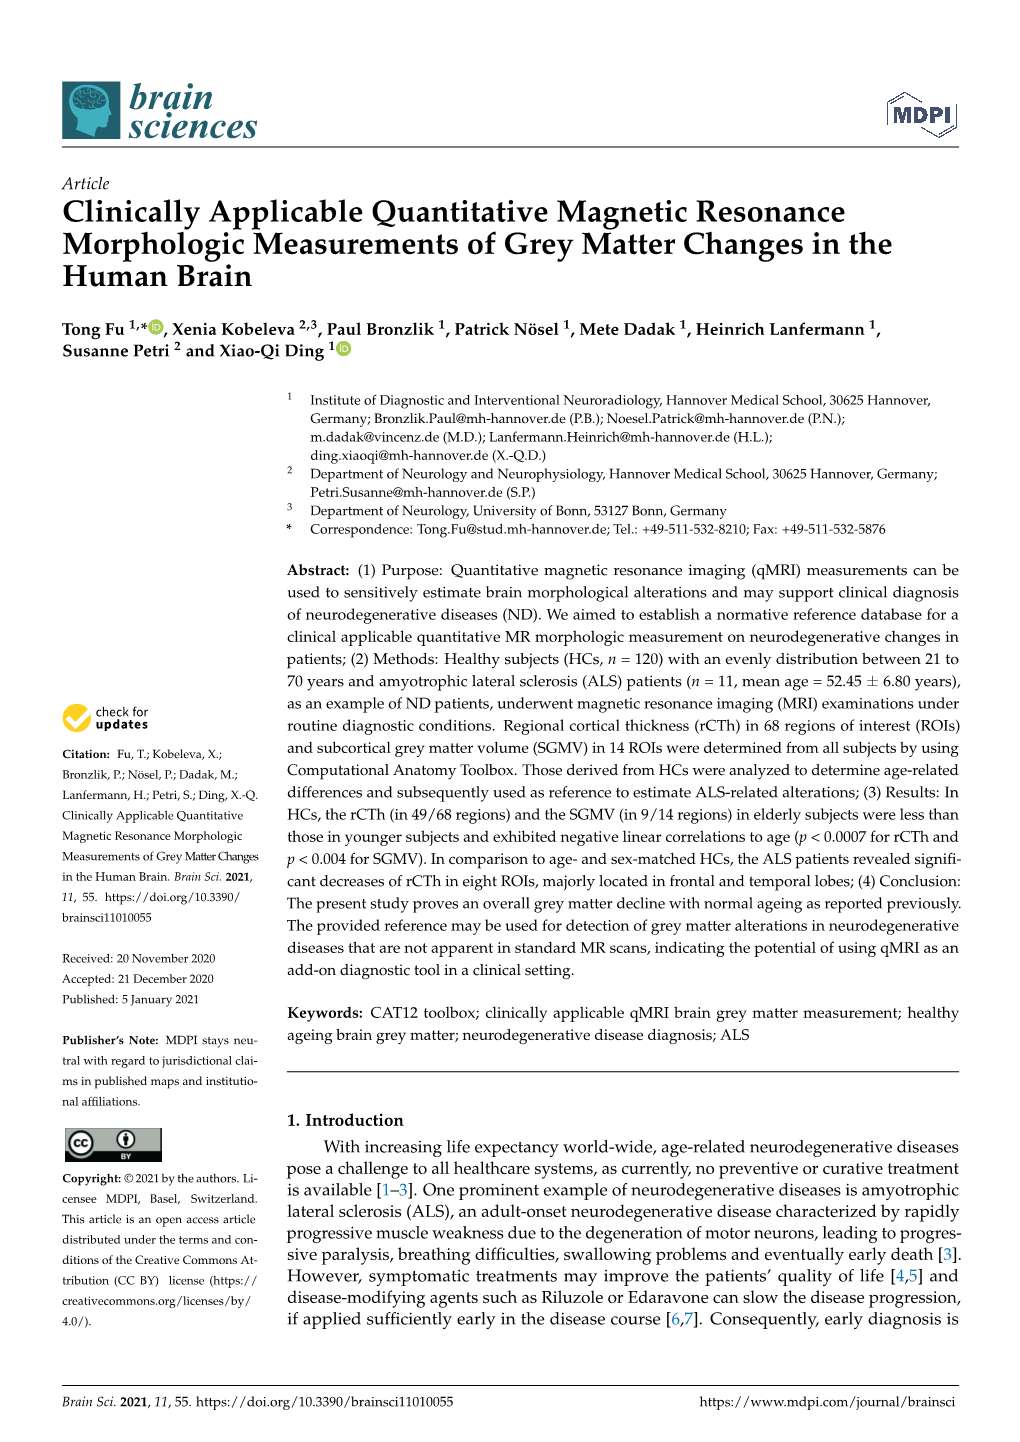 Clinically Applicable Quantitative Magnetic Resonance Morphologic Measurements of Grey Matter Changes in the Human Brain